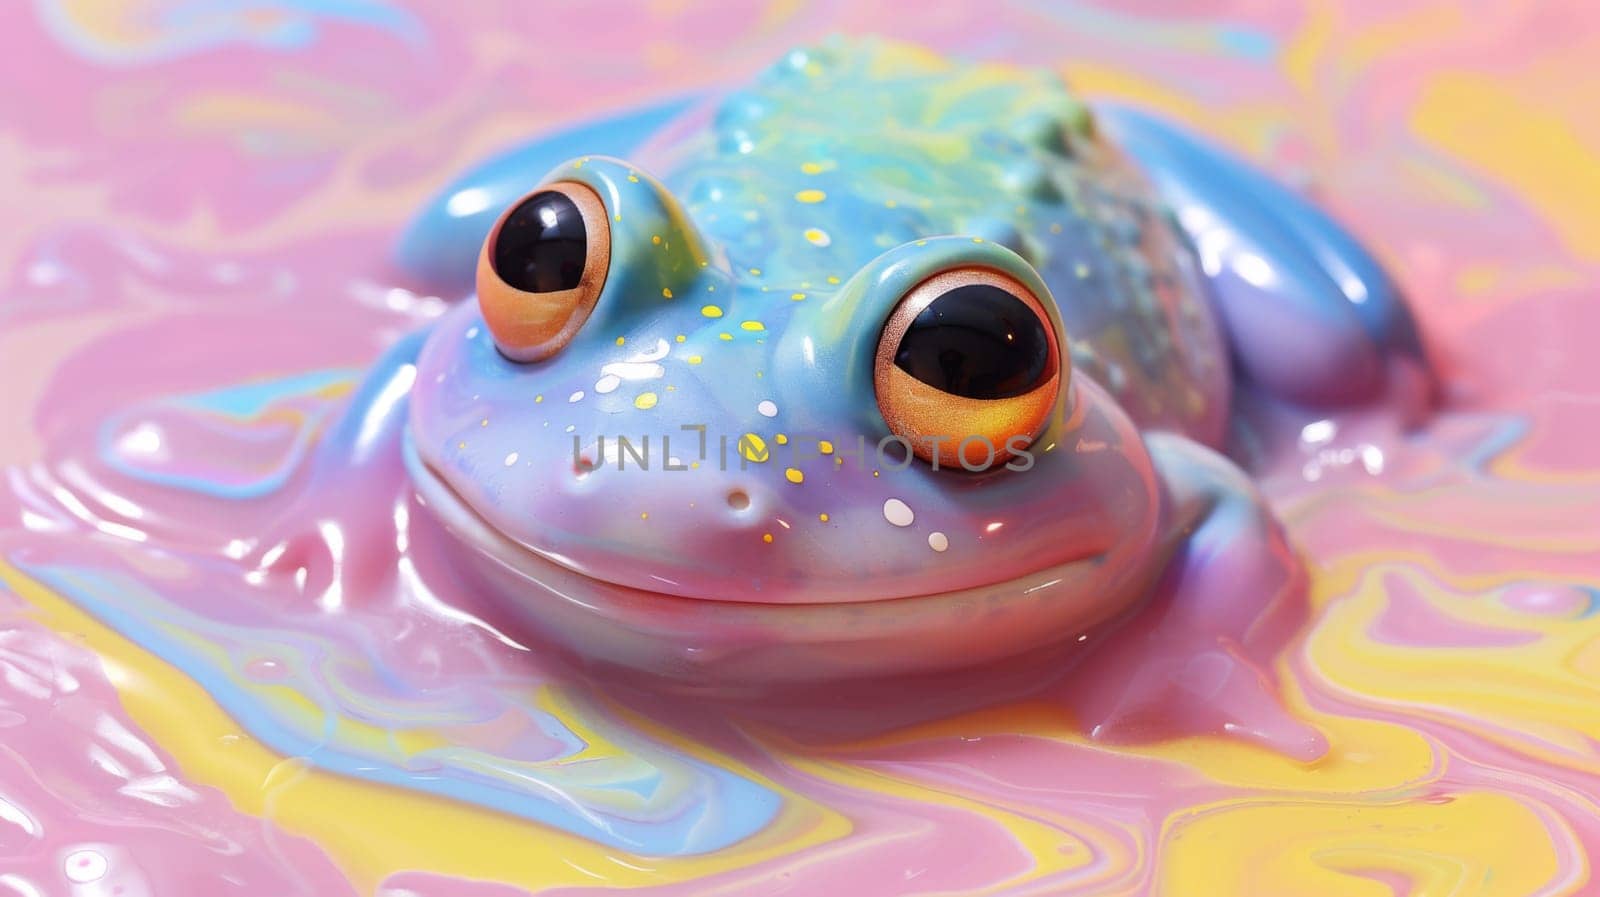 A frog sitting on a colorful liquid with eyes and mouth open